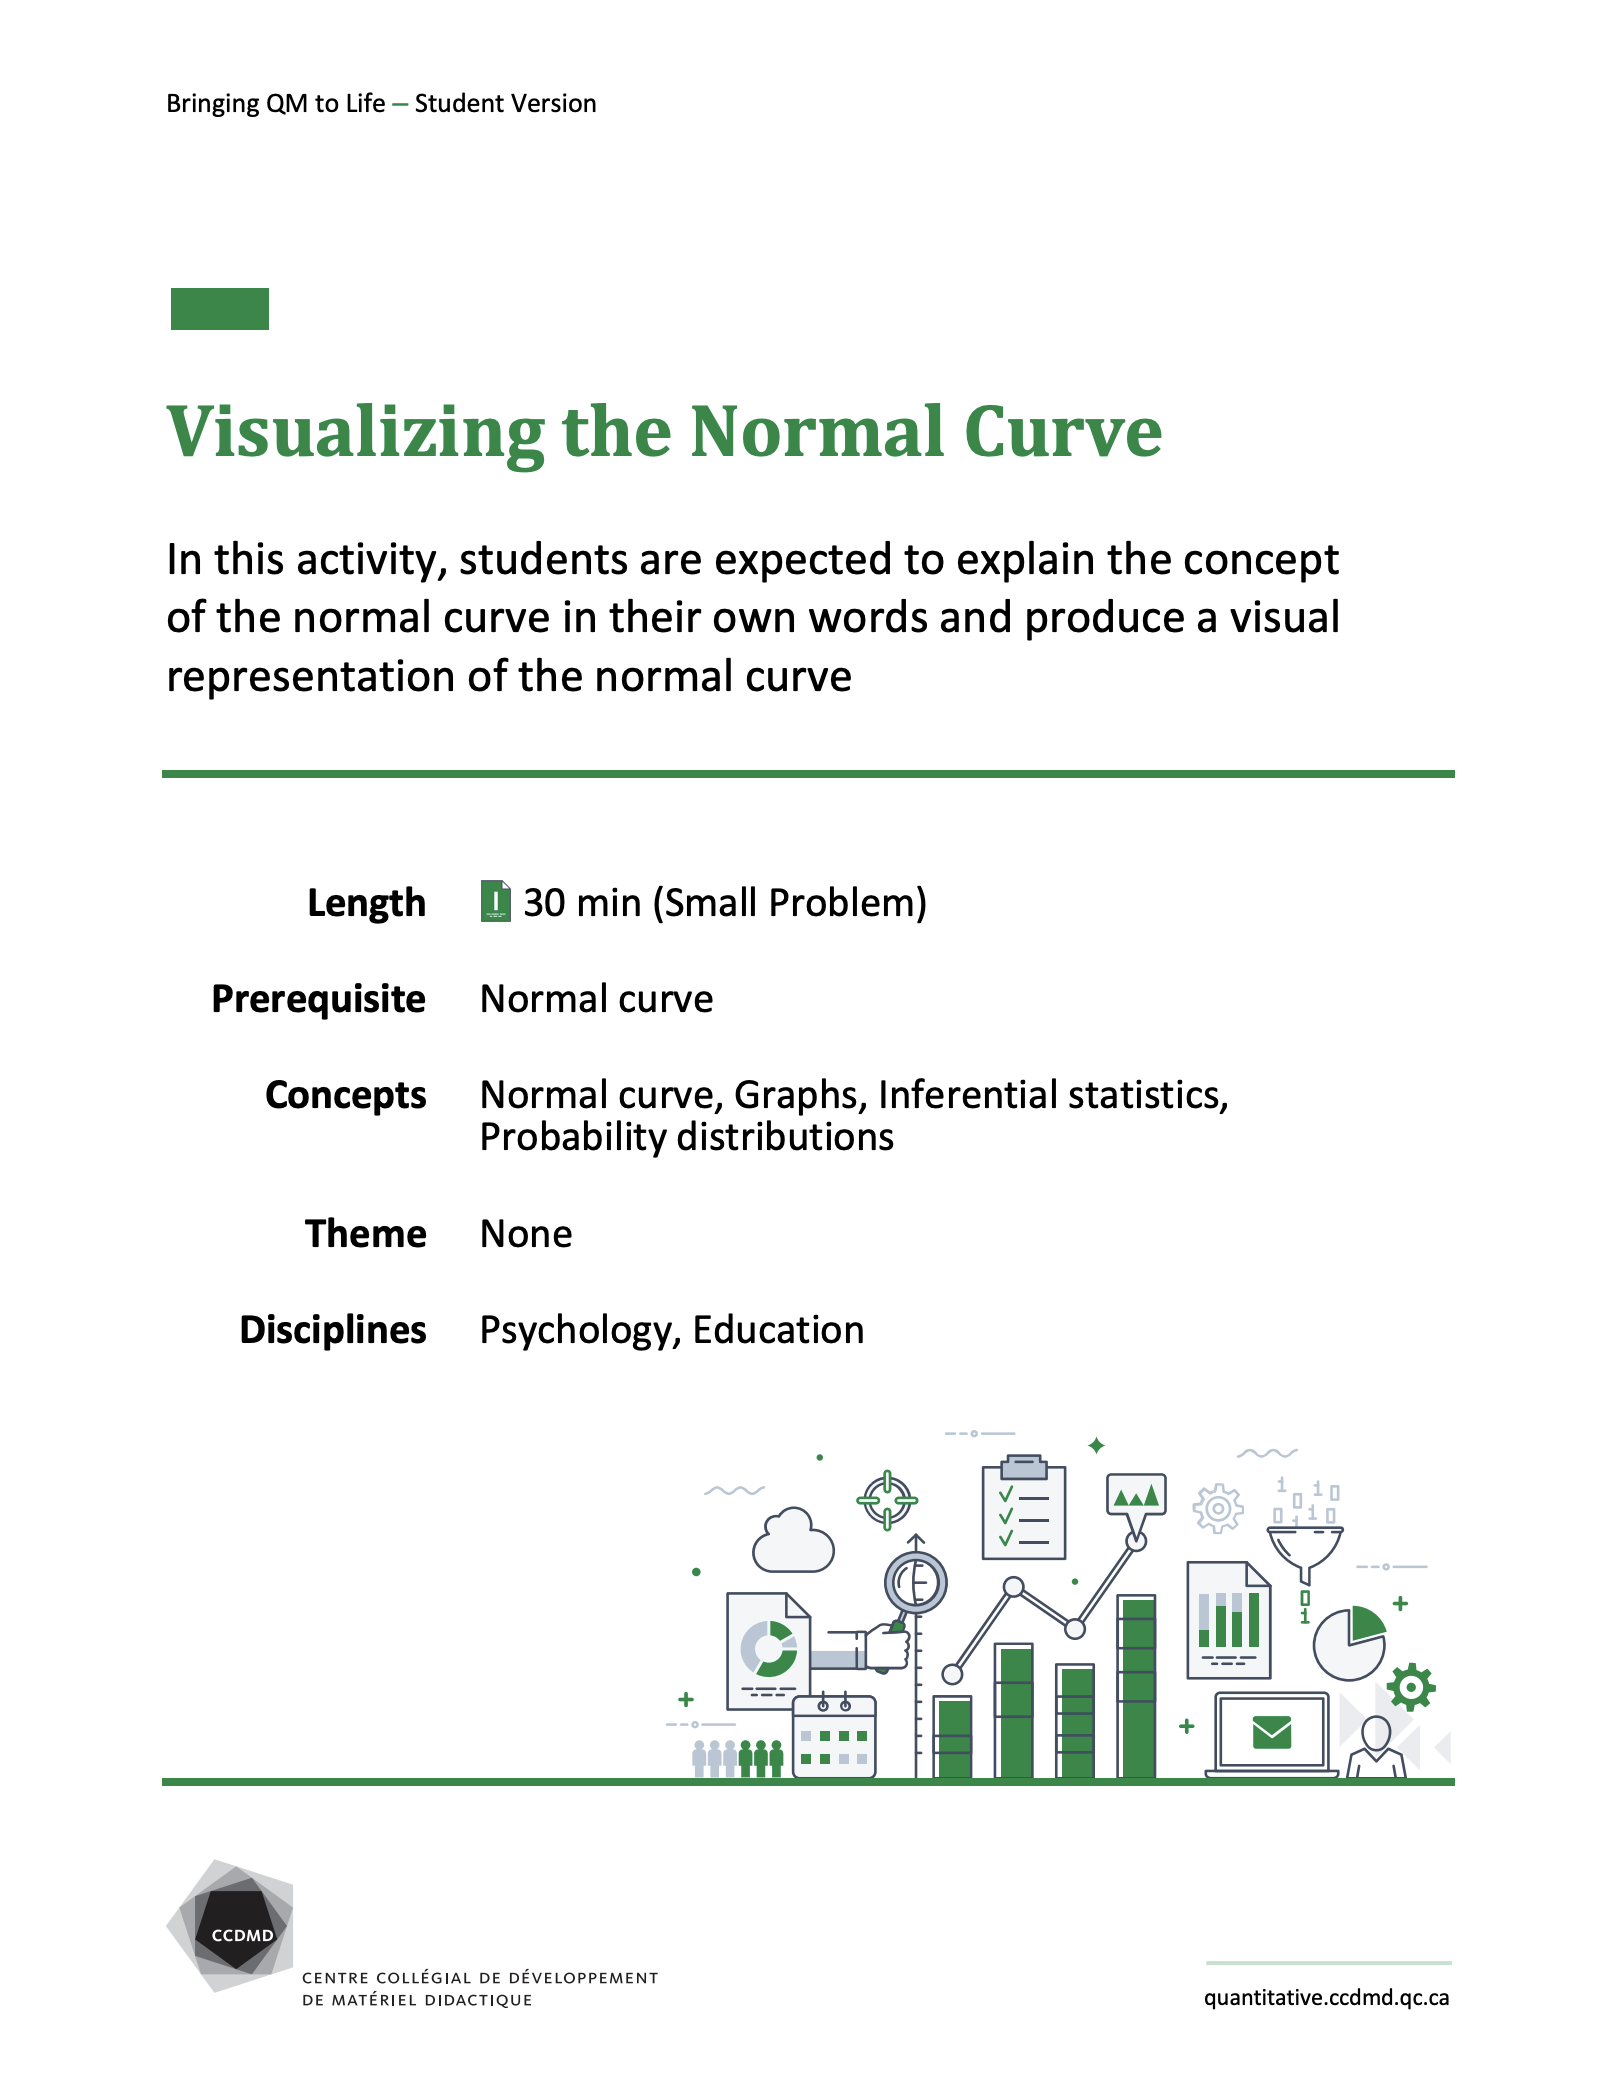 Visualizing the Normal Curve